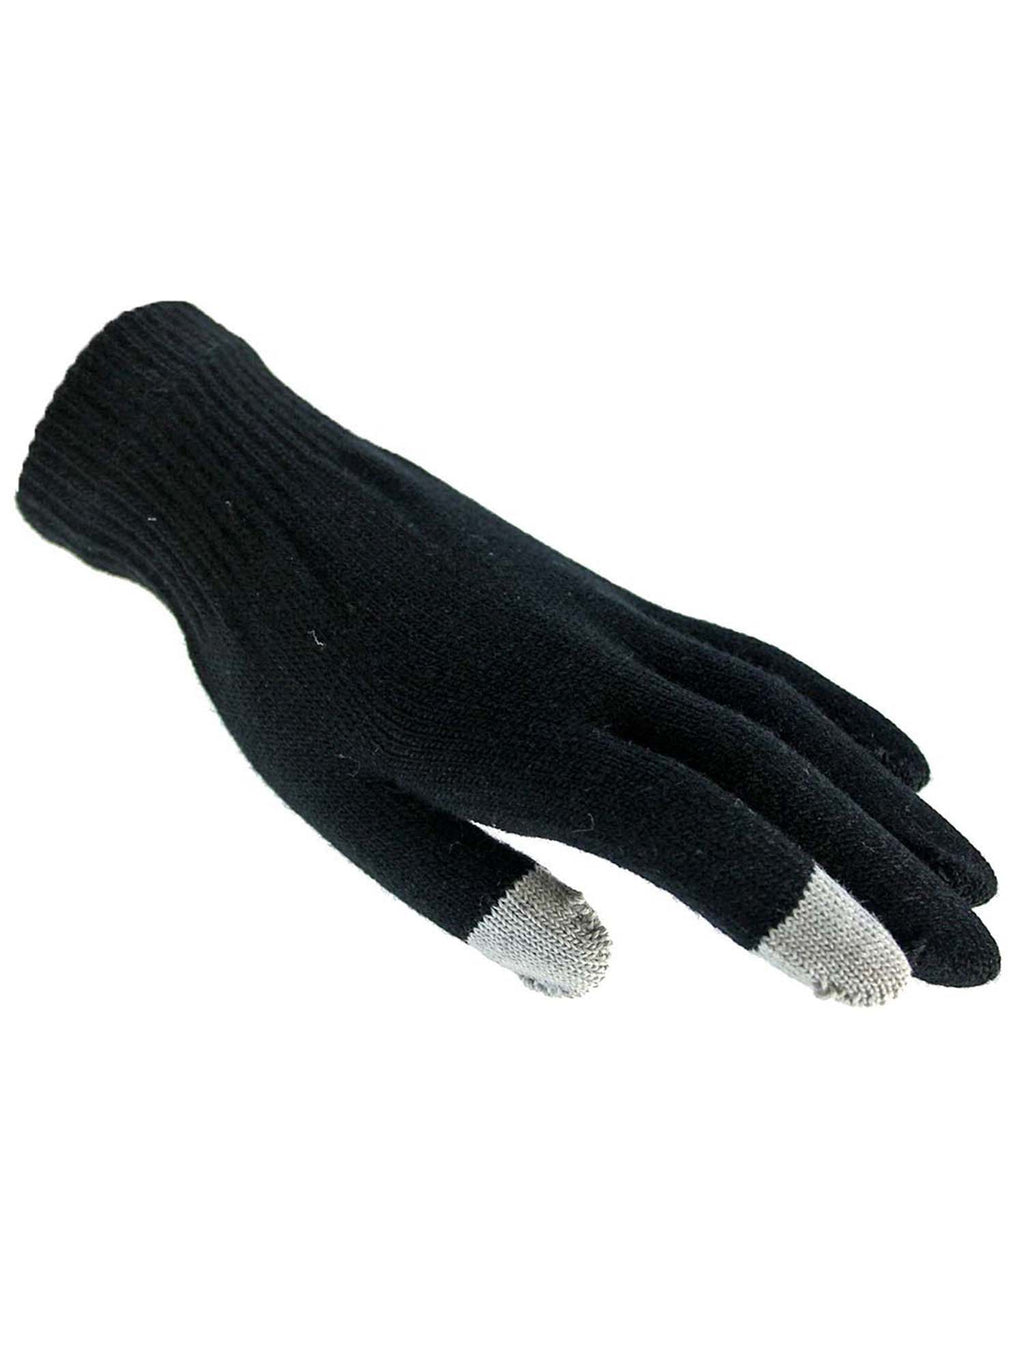 Stretchy Knit Black Touch Screen Texting Gloves